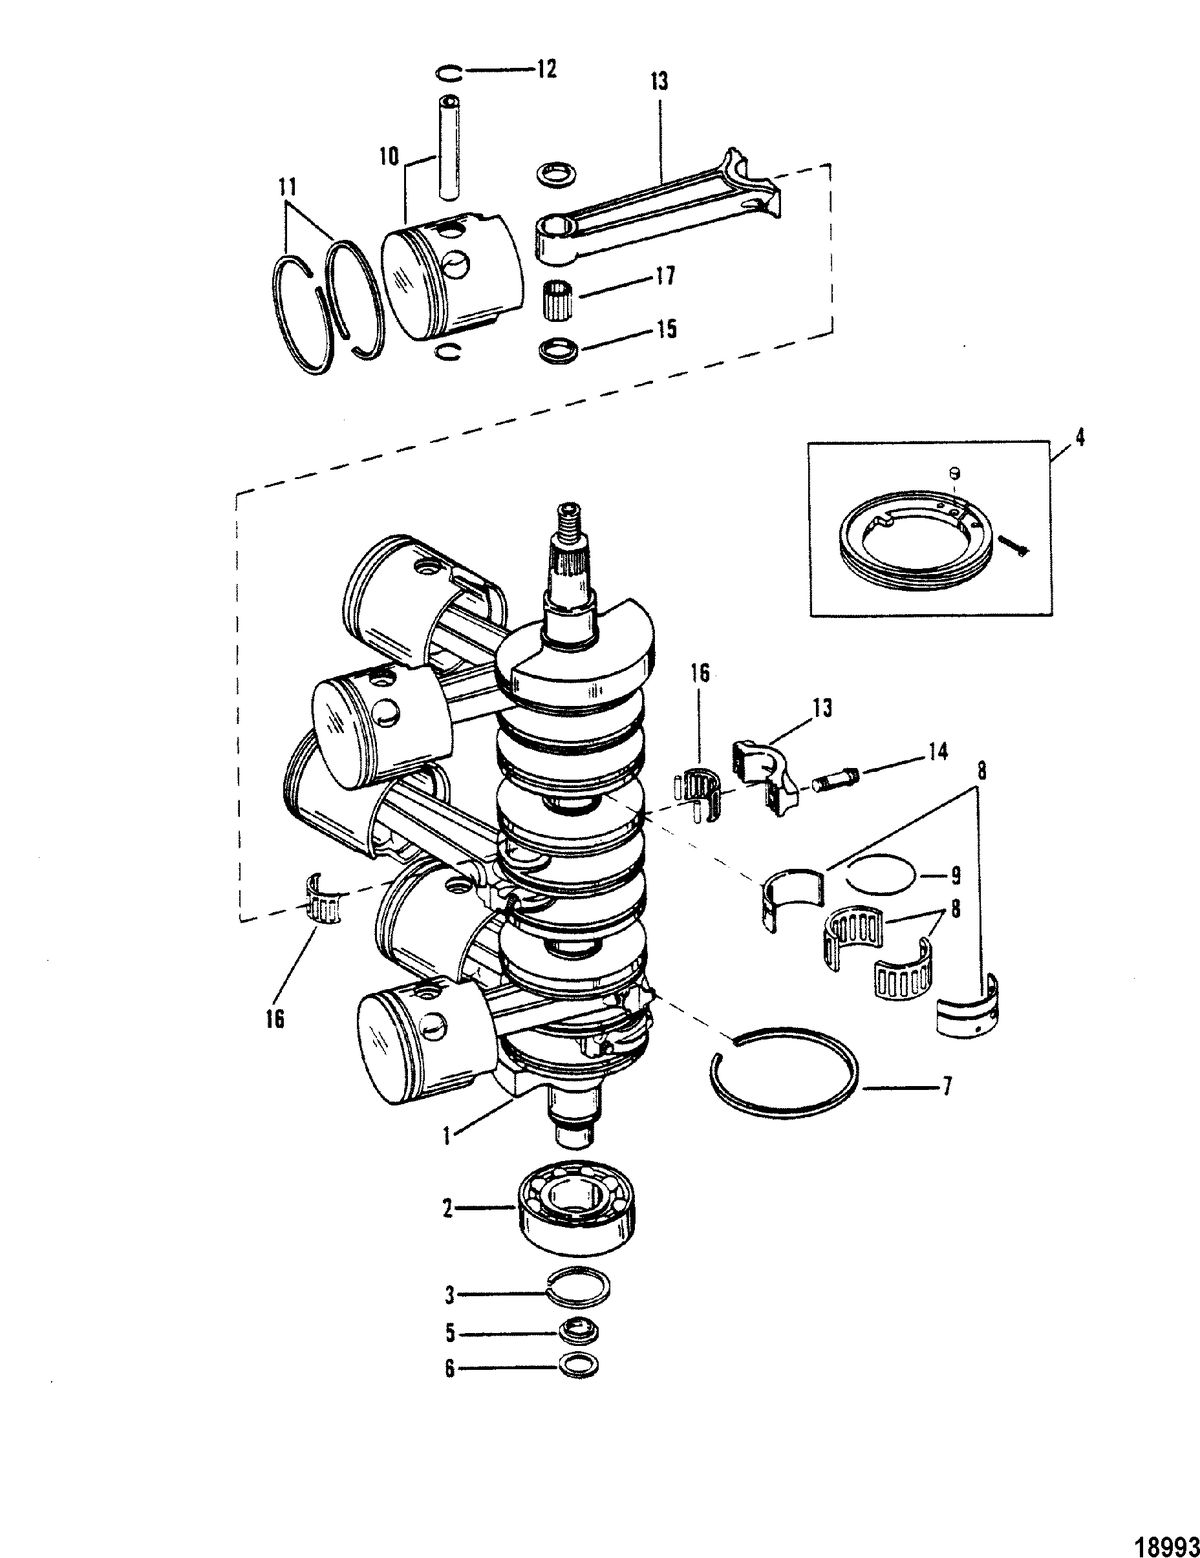 MERCURY/MARINER 200 H.P. (V-6) (1978-1988 COMBINED BOOKS) Crankshaft, Pistons, and Connecting Rods